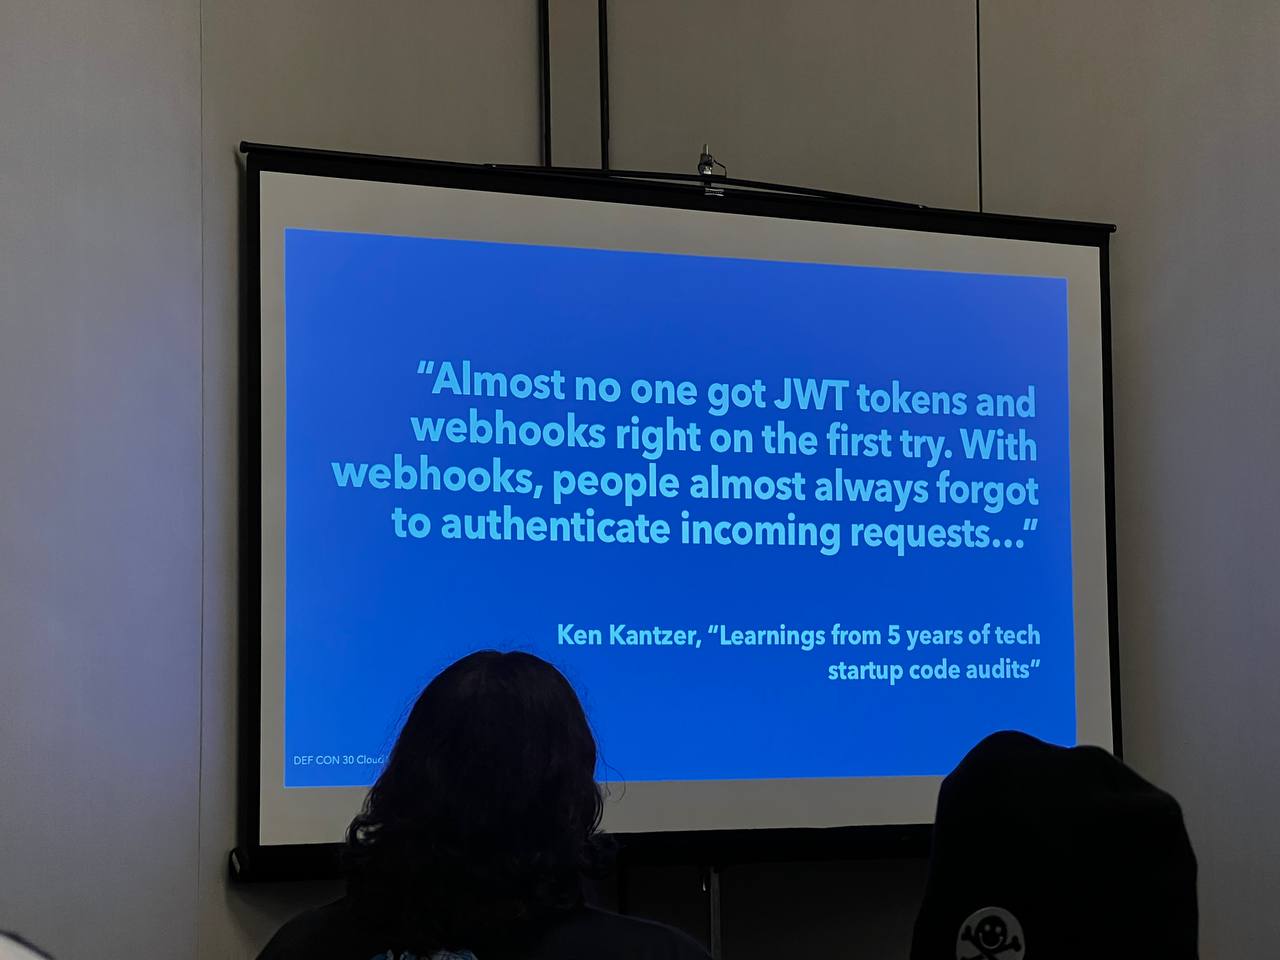 Almost no one got JWT tokens and webhooks right on the first try. With webhooks, people almost always forgot to authenticate incoming requests. By Ken Kantzer.